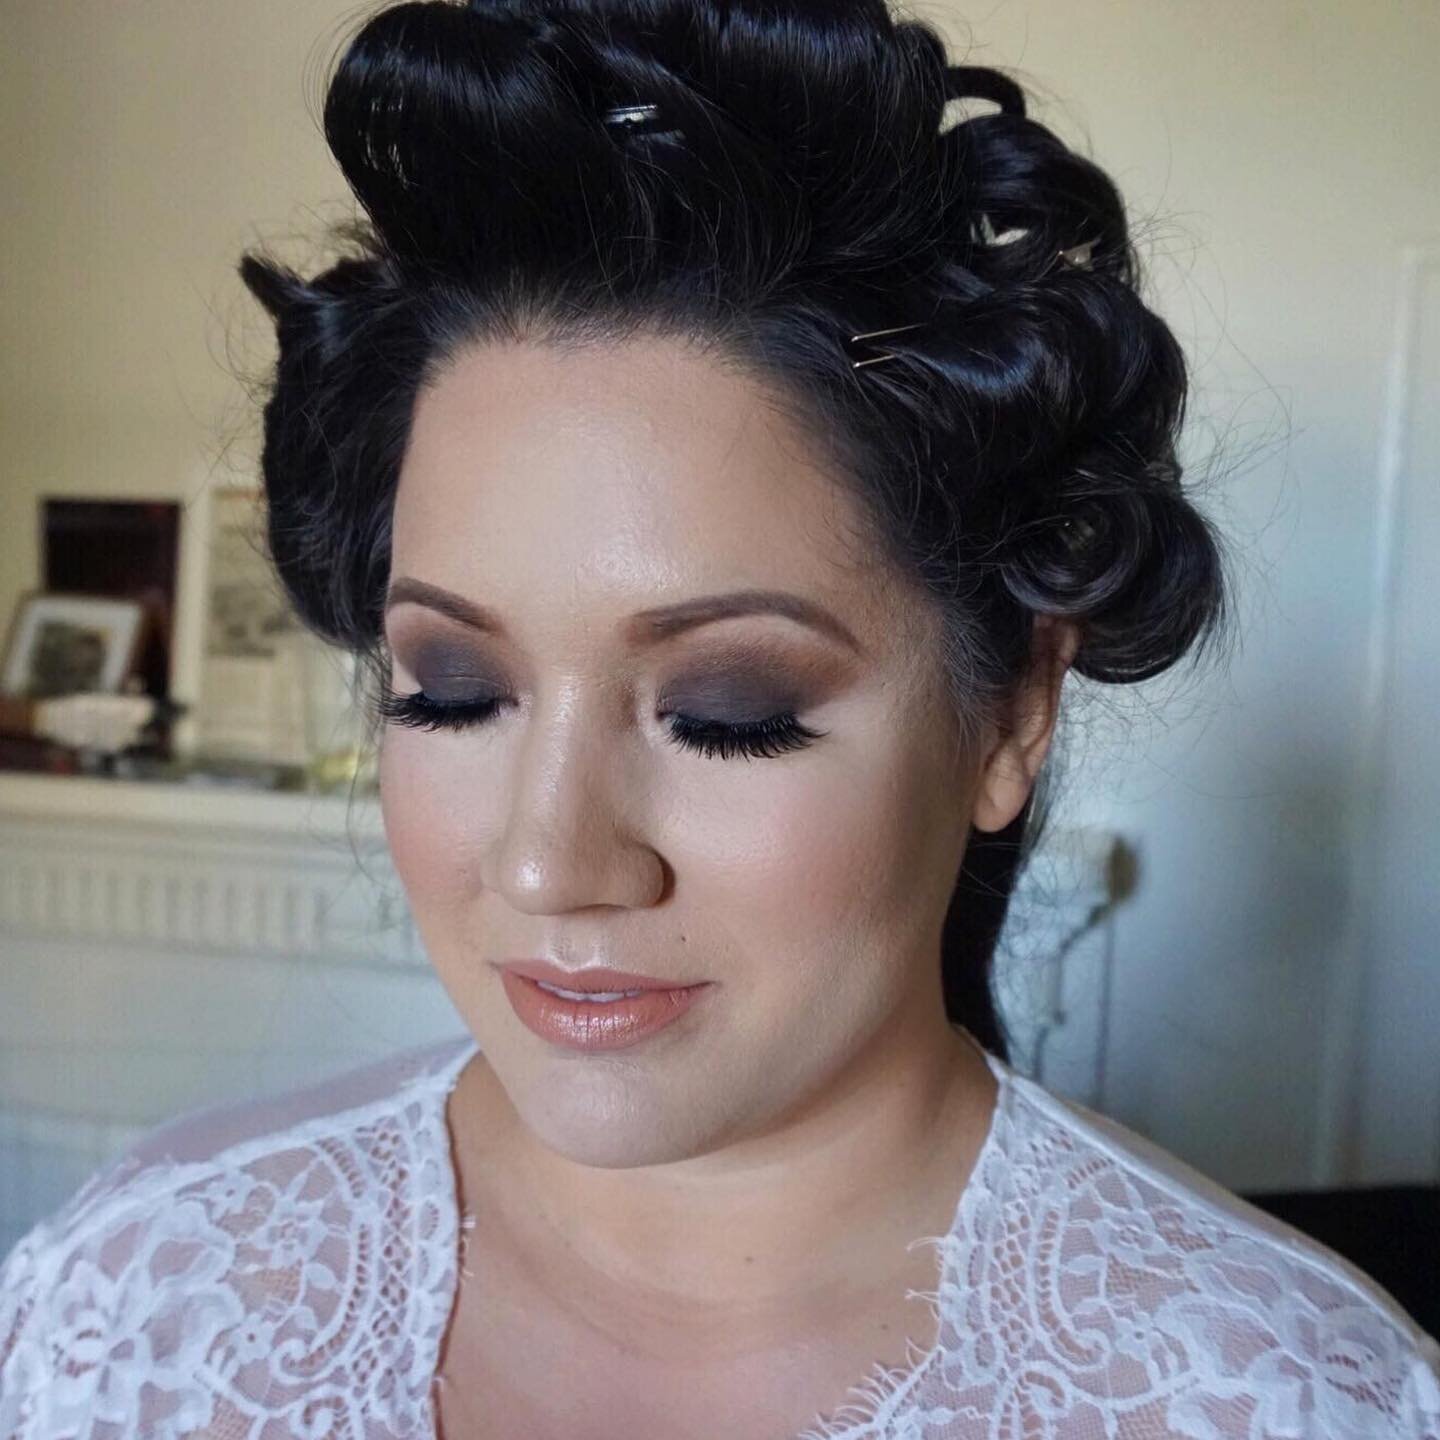 We love a full Smokey glam! 
LIMITED SPOTS available in October so get your date booked asap 💍🤍
Book with me through my website&mdash; link in bio 
#savannahwedding #savannahweddings #savannahbride #savannahbrides #savannahmakeupartist #blufftonwed